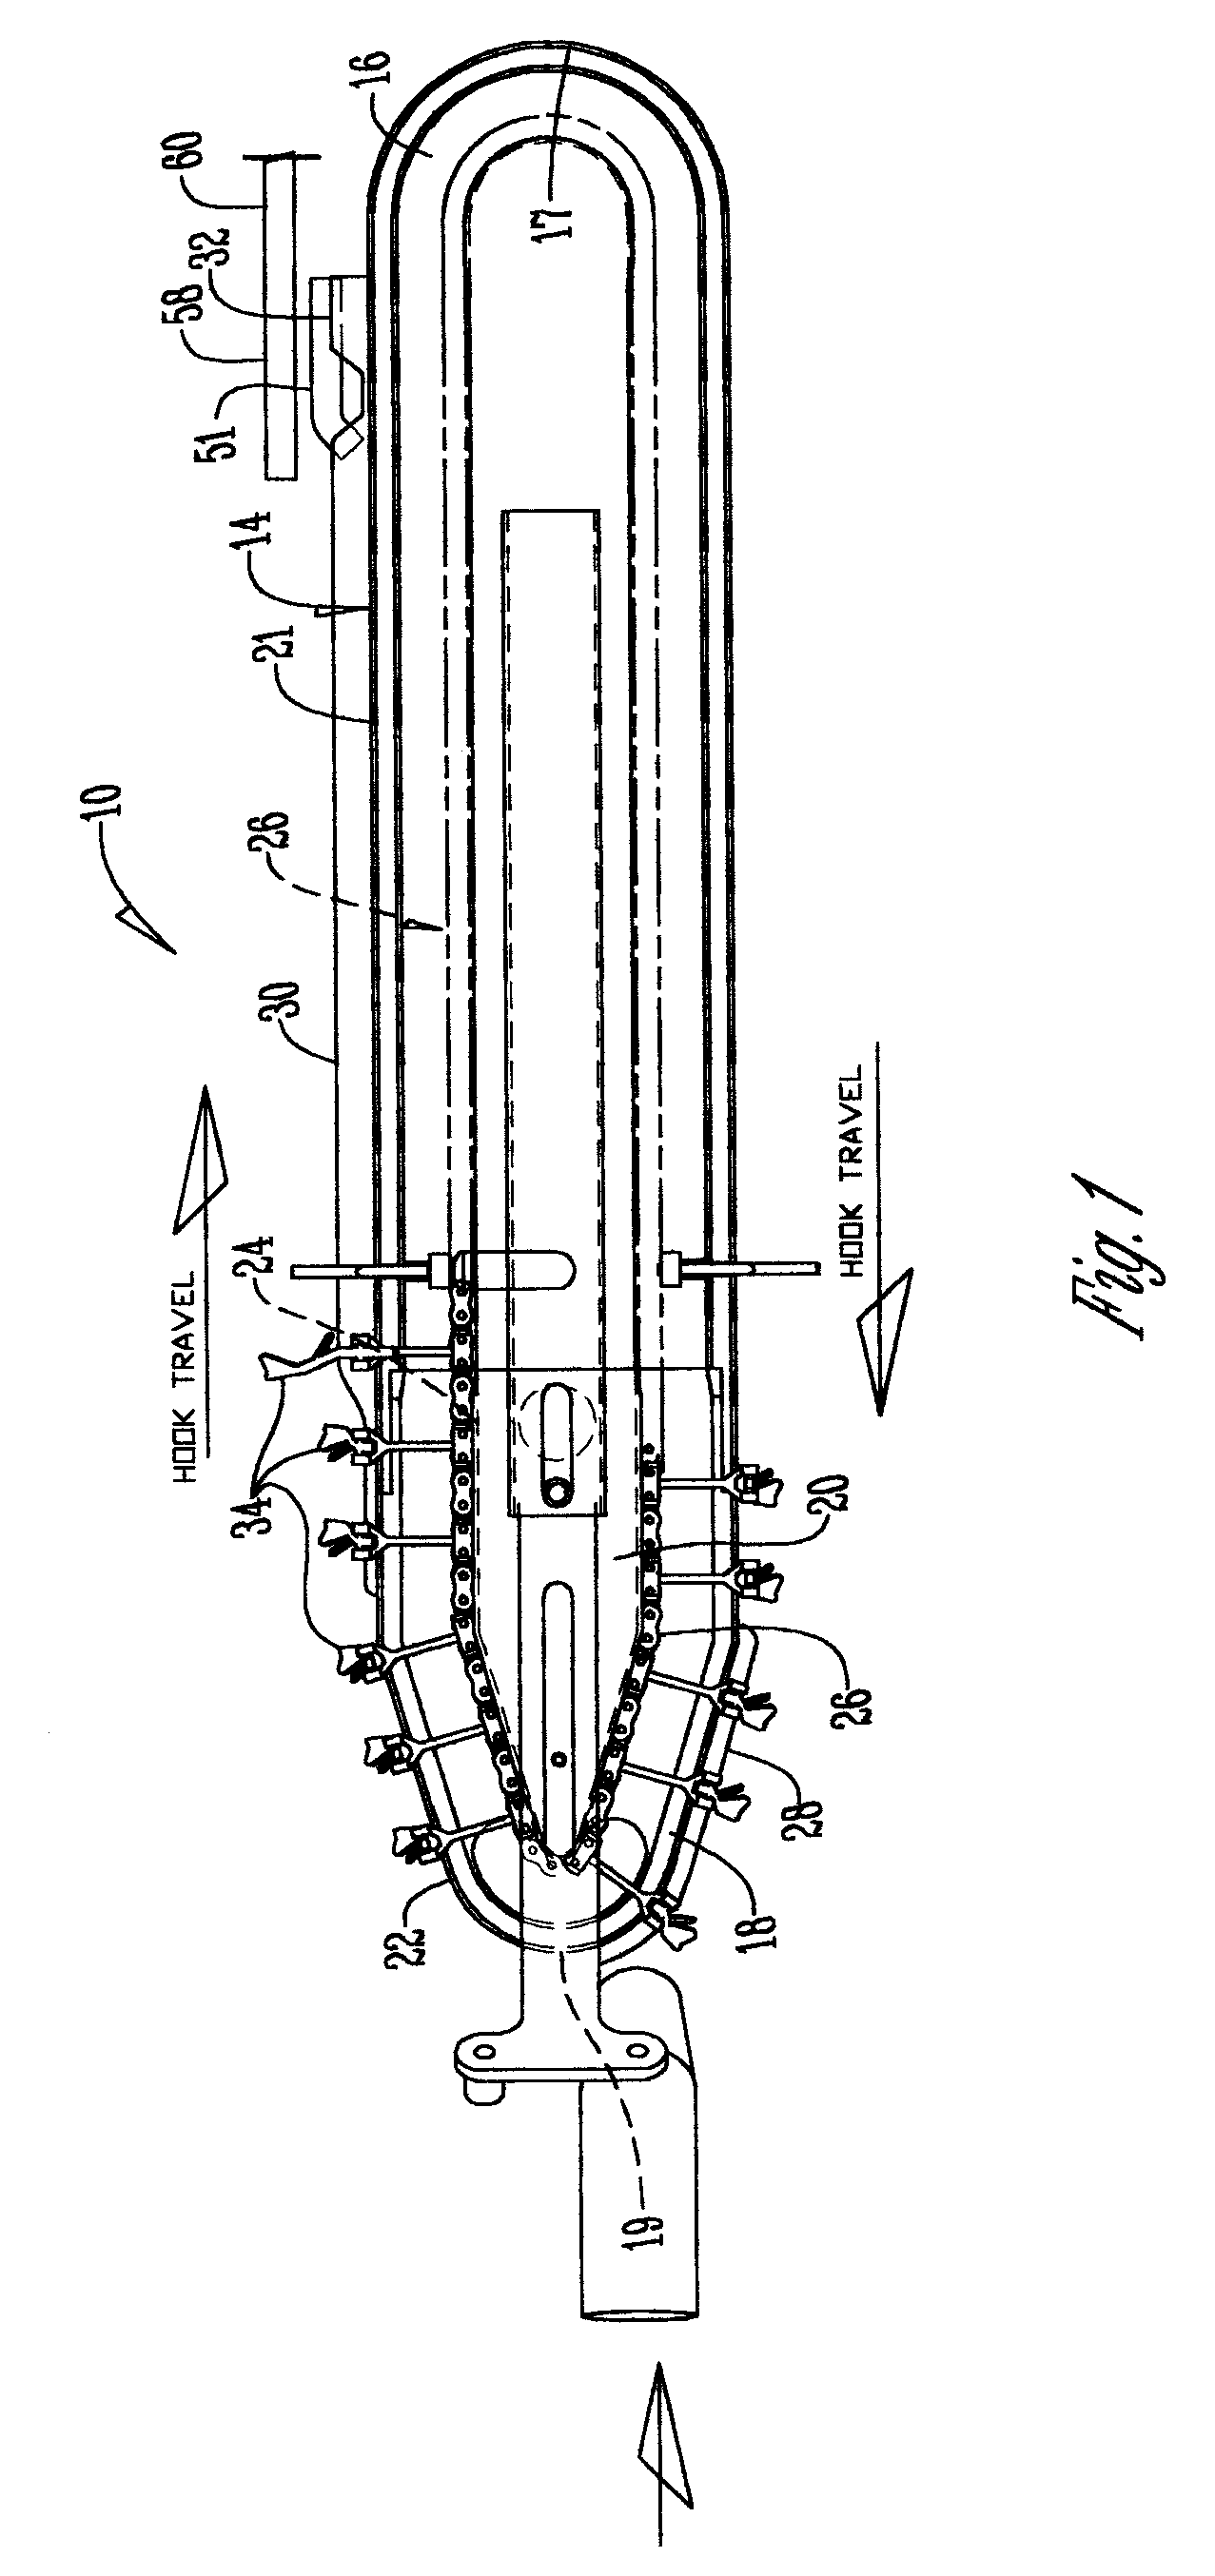 Conveyor system with pivotable hooks